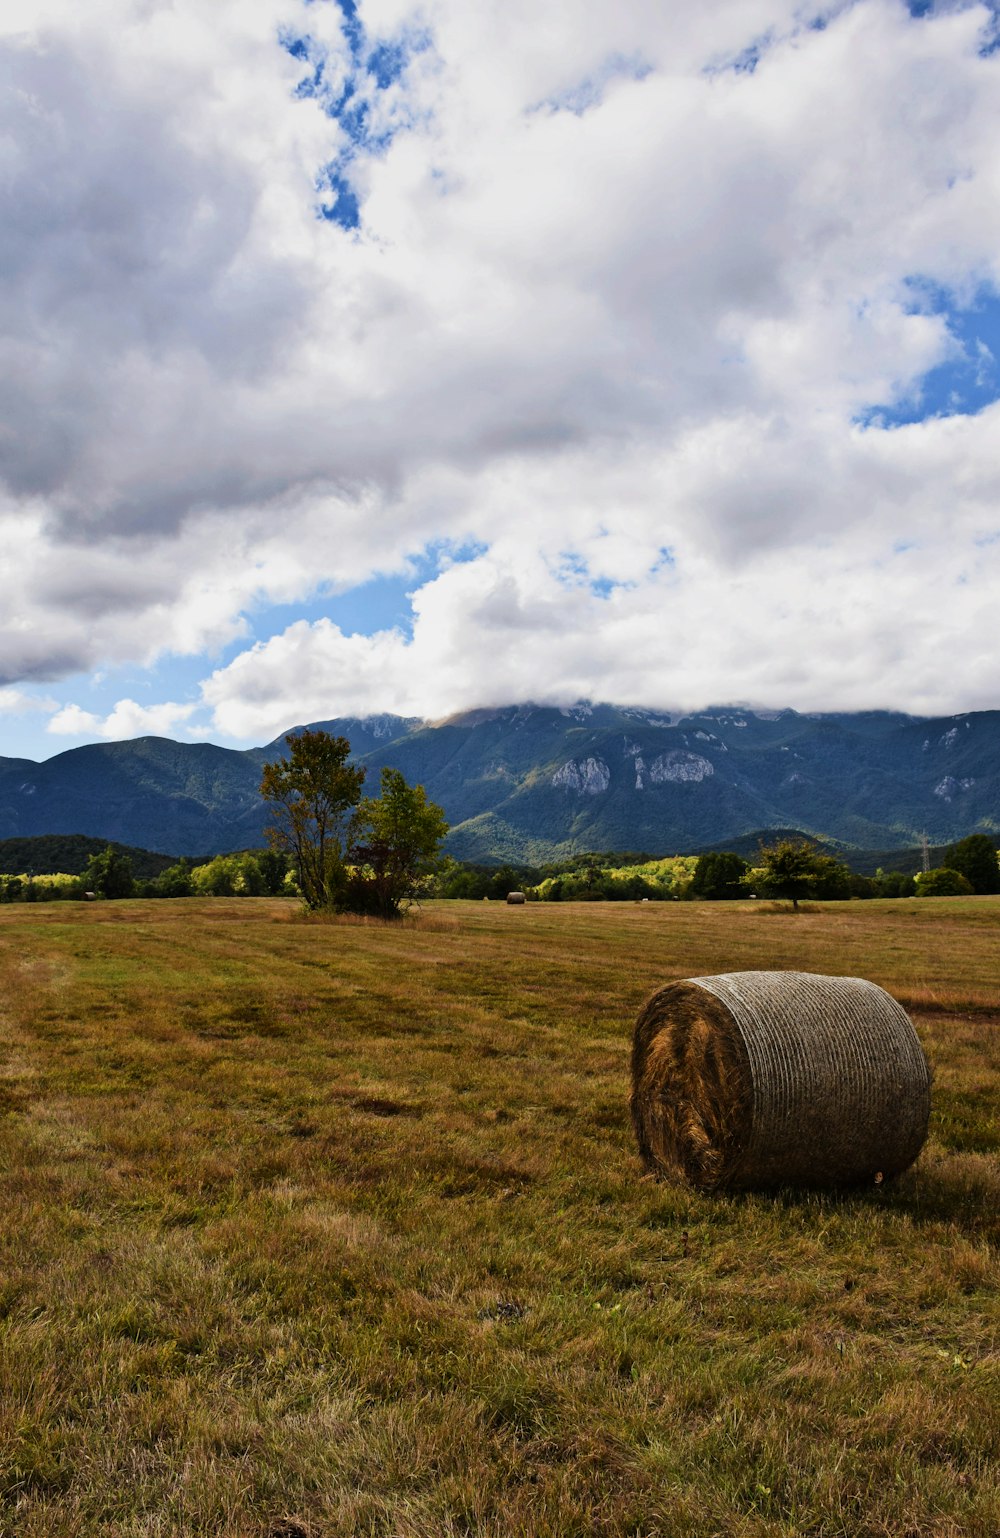 a large hay bale in a field with mountains in the background